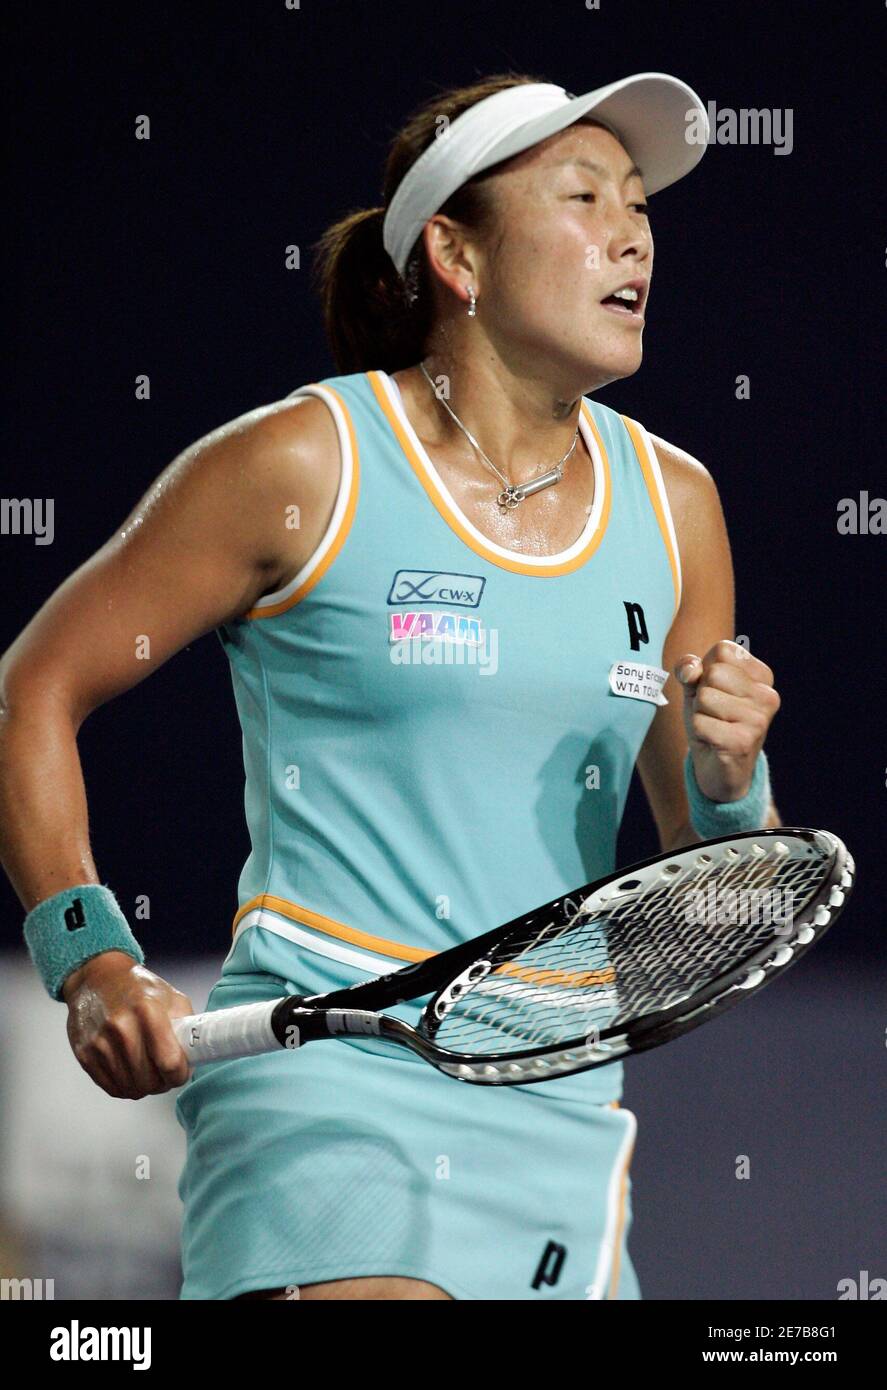 Japan's Ai Sugiyama celebrates after scoring a point against Czech  Republic's Nicole Vaidisova during their second round match at the China  Open tennis tournament in Beijing September 20, 2006. REUTERS/Claro Cortes  IV (